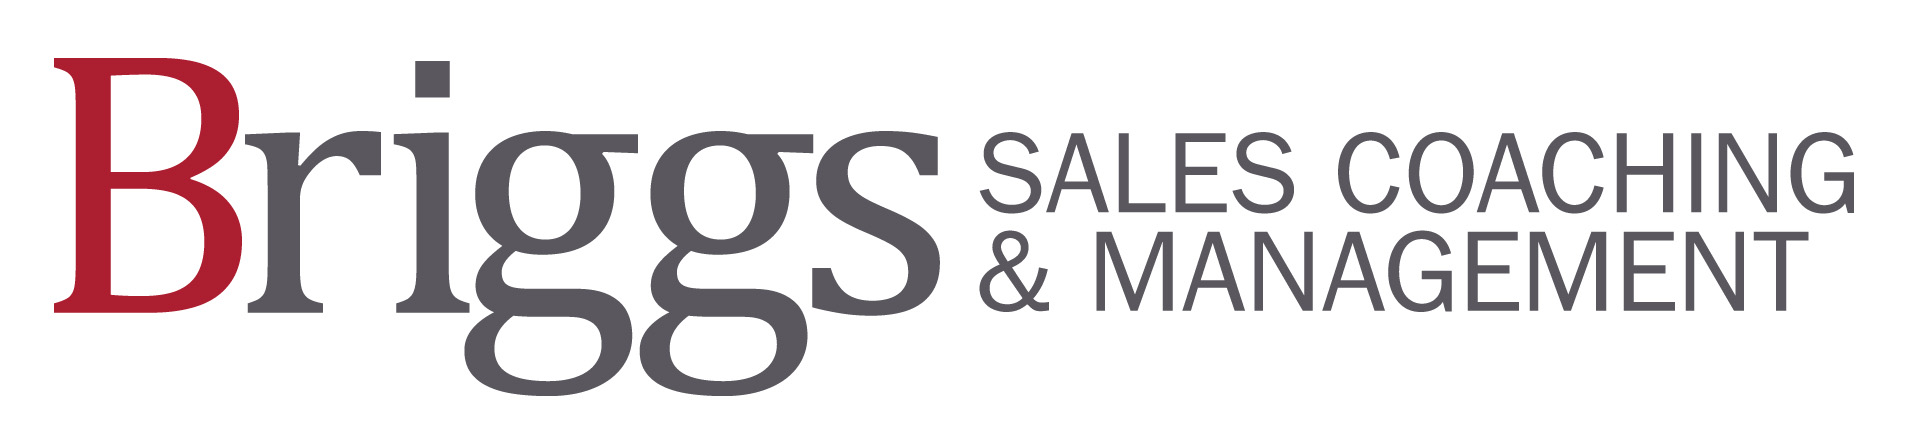 Briggs Sales Coaching and Management